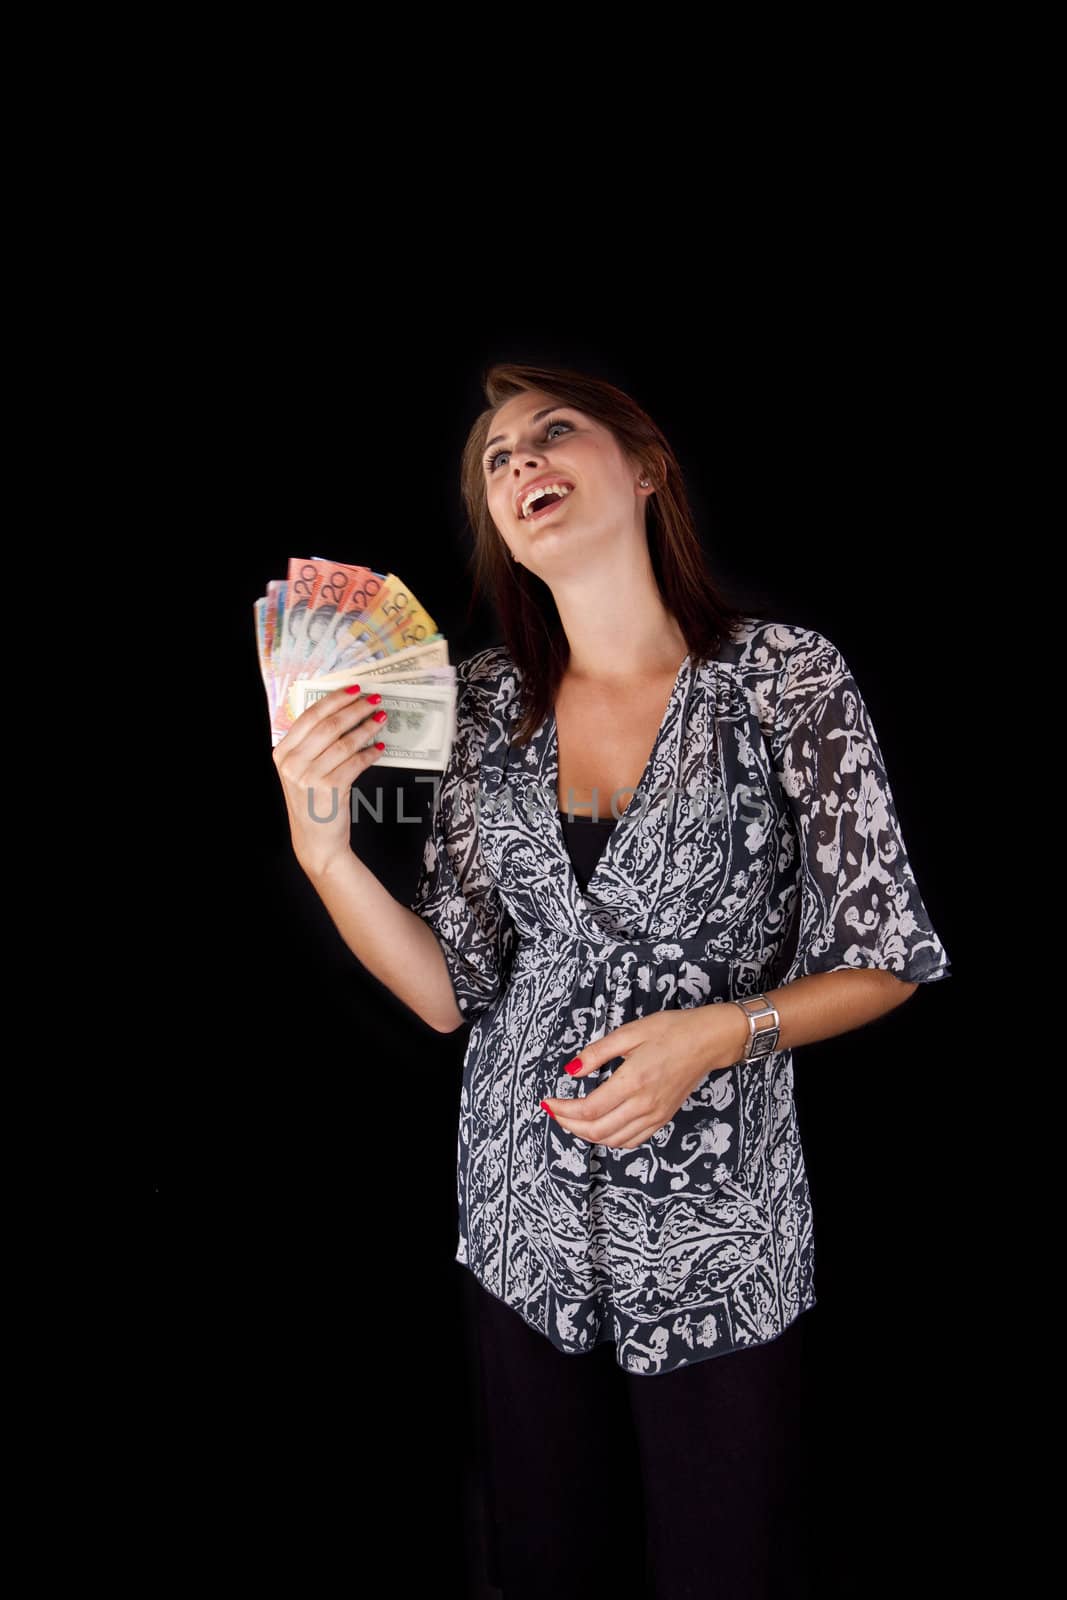 Young Lady fanning herself with various currency notes